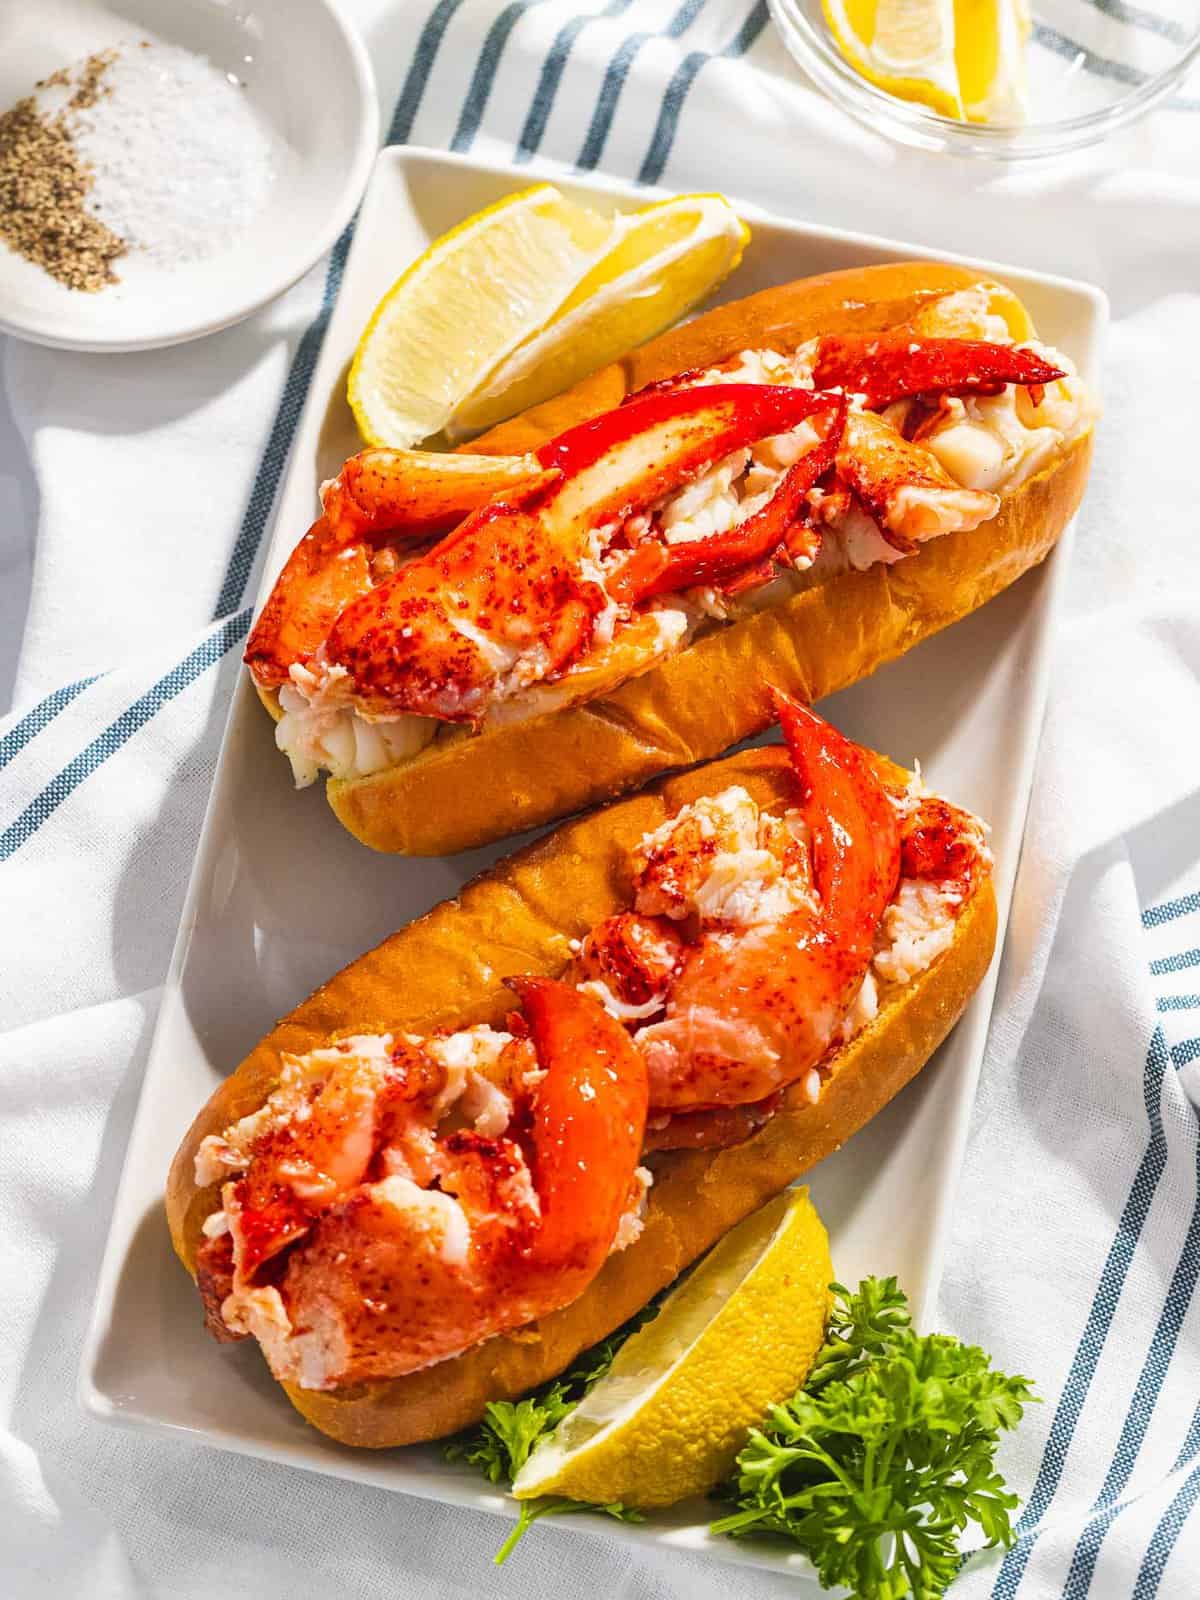 Connecticut-style warm lobster rolls with lobster claw meat.